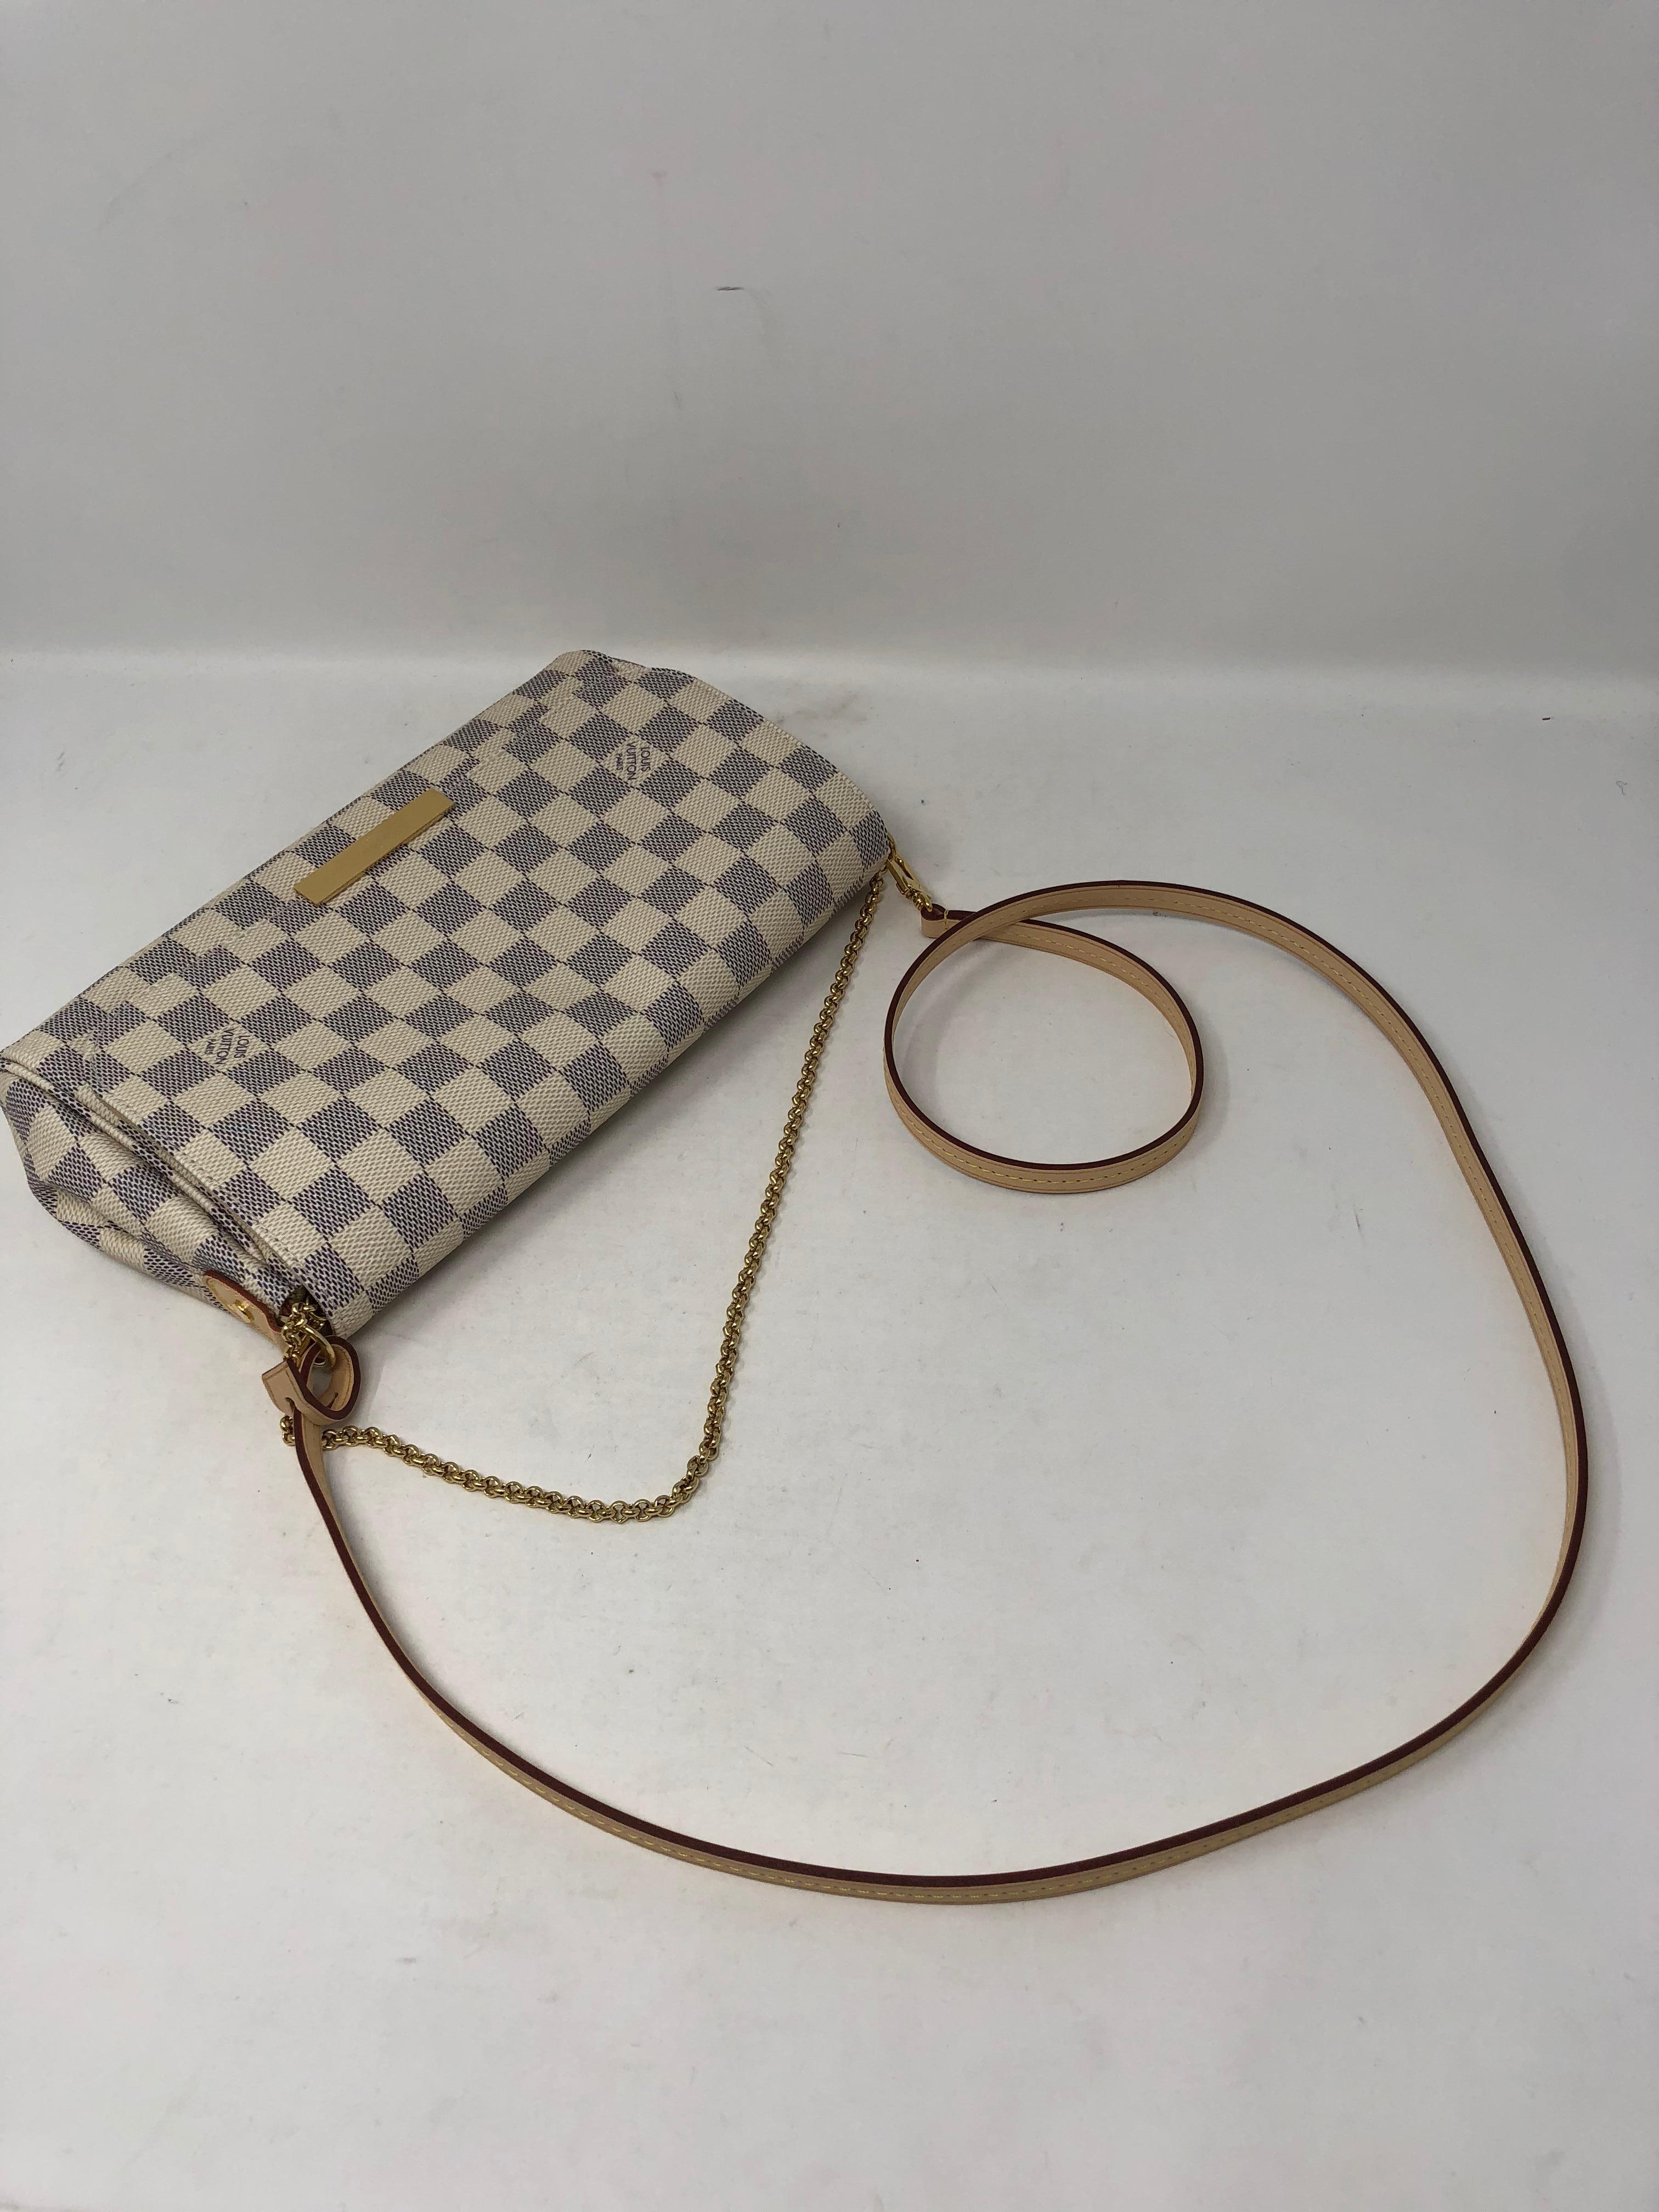 Louis Vuitton Damier Azure Favorite MM Crossbody Bag. Brand new and sold out favorite bag. Long strap and gold chain are detachable. Can be worn 3 ways. Comes with box and dust cover.  Guaranteed authentic. 